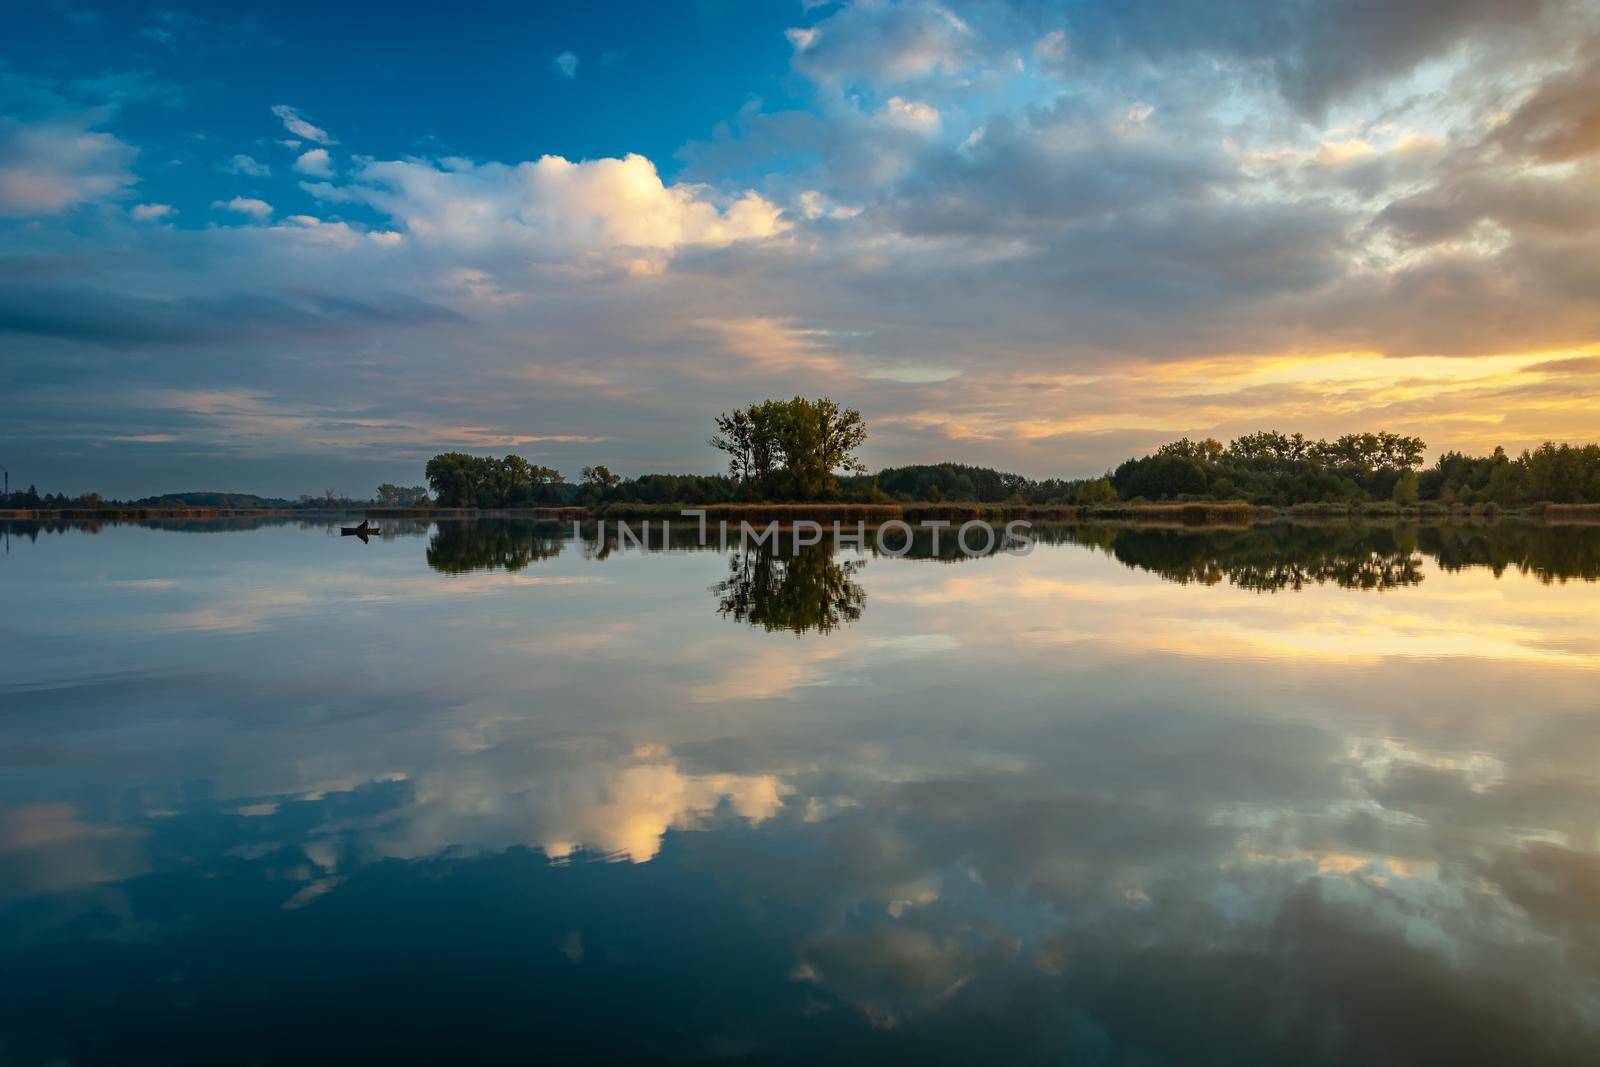 Mirror reflection in the water of evening clouds by darekb22